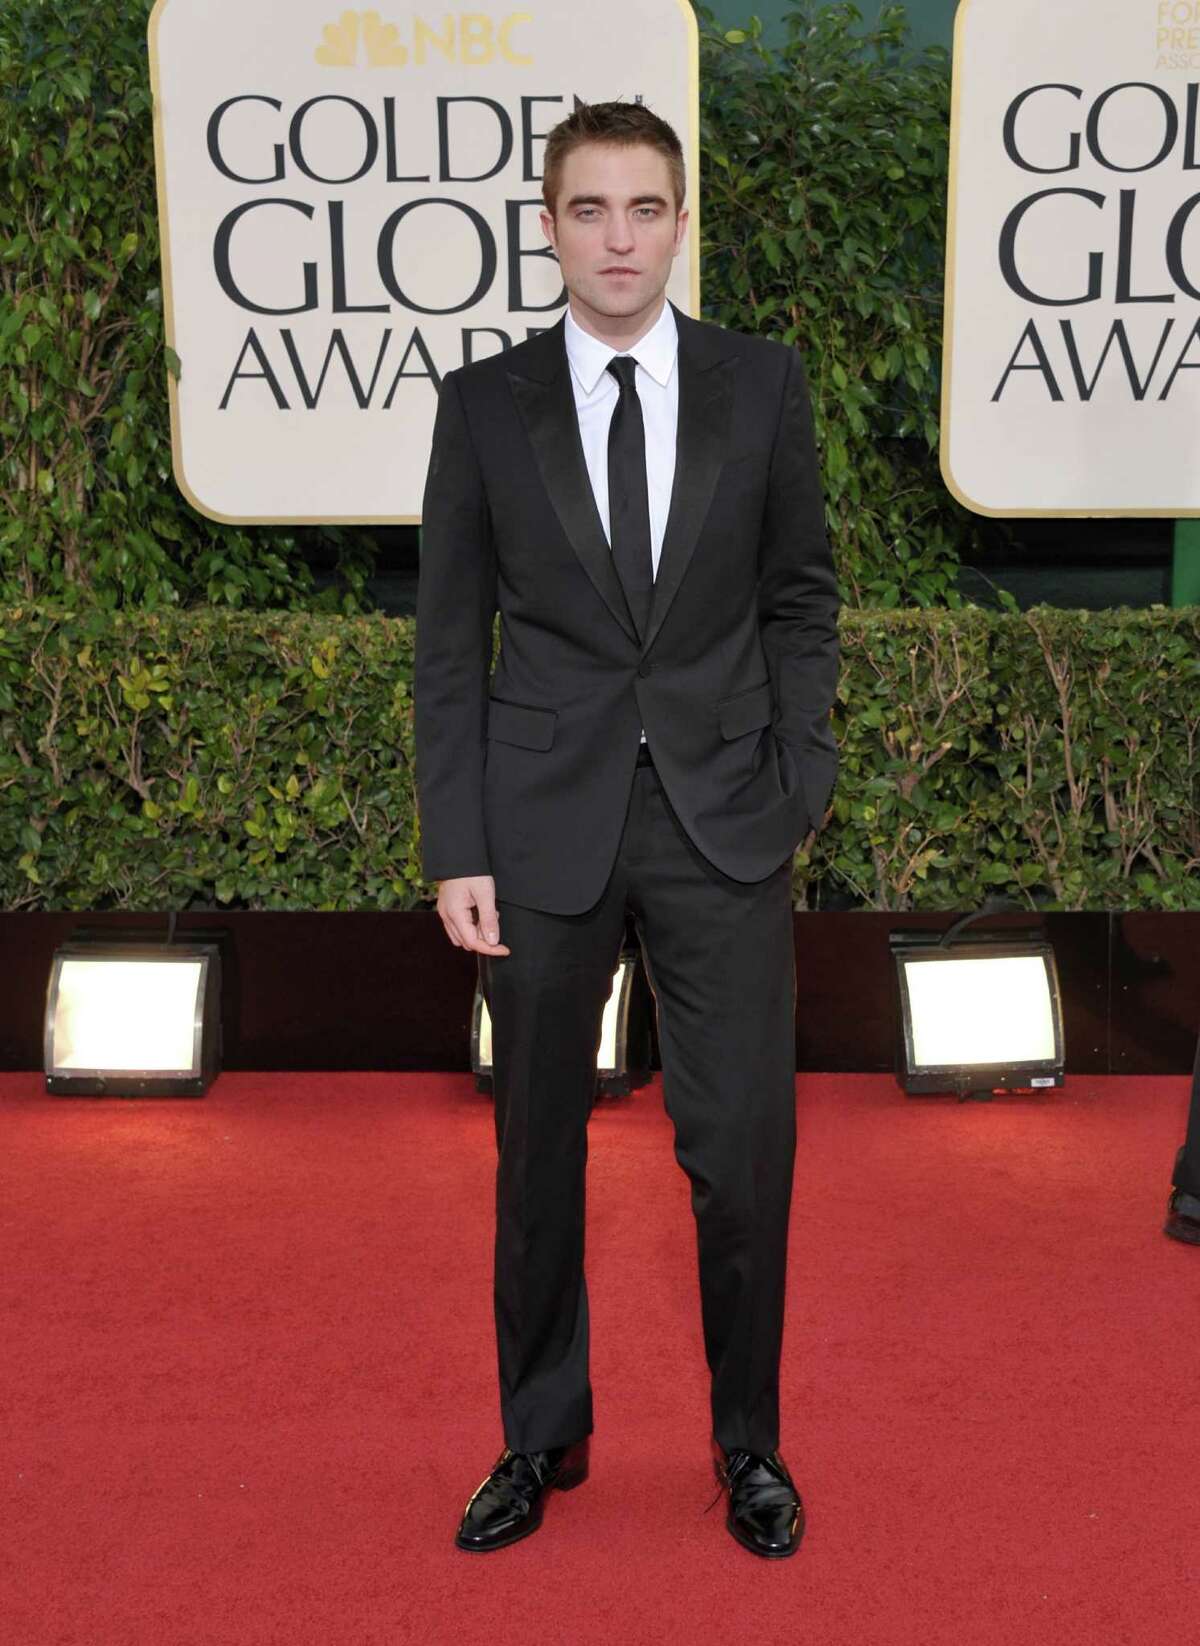 Actor Robert Pattinson arrives at the 70th Annual Golden Globe Awards at the Beverly Hilton Hotel on Sunday Jan. 13, 2013, in Beverly Hills, Calif. (Photo by John Shearer/Invision/AP)